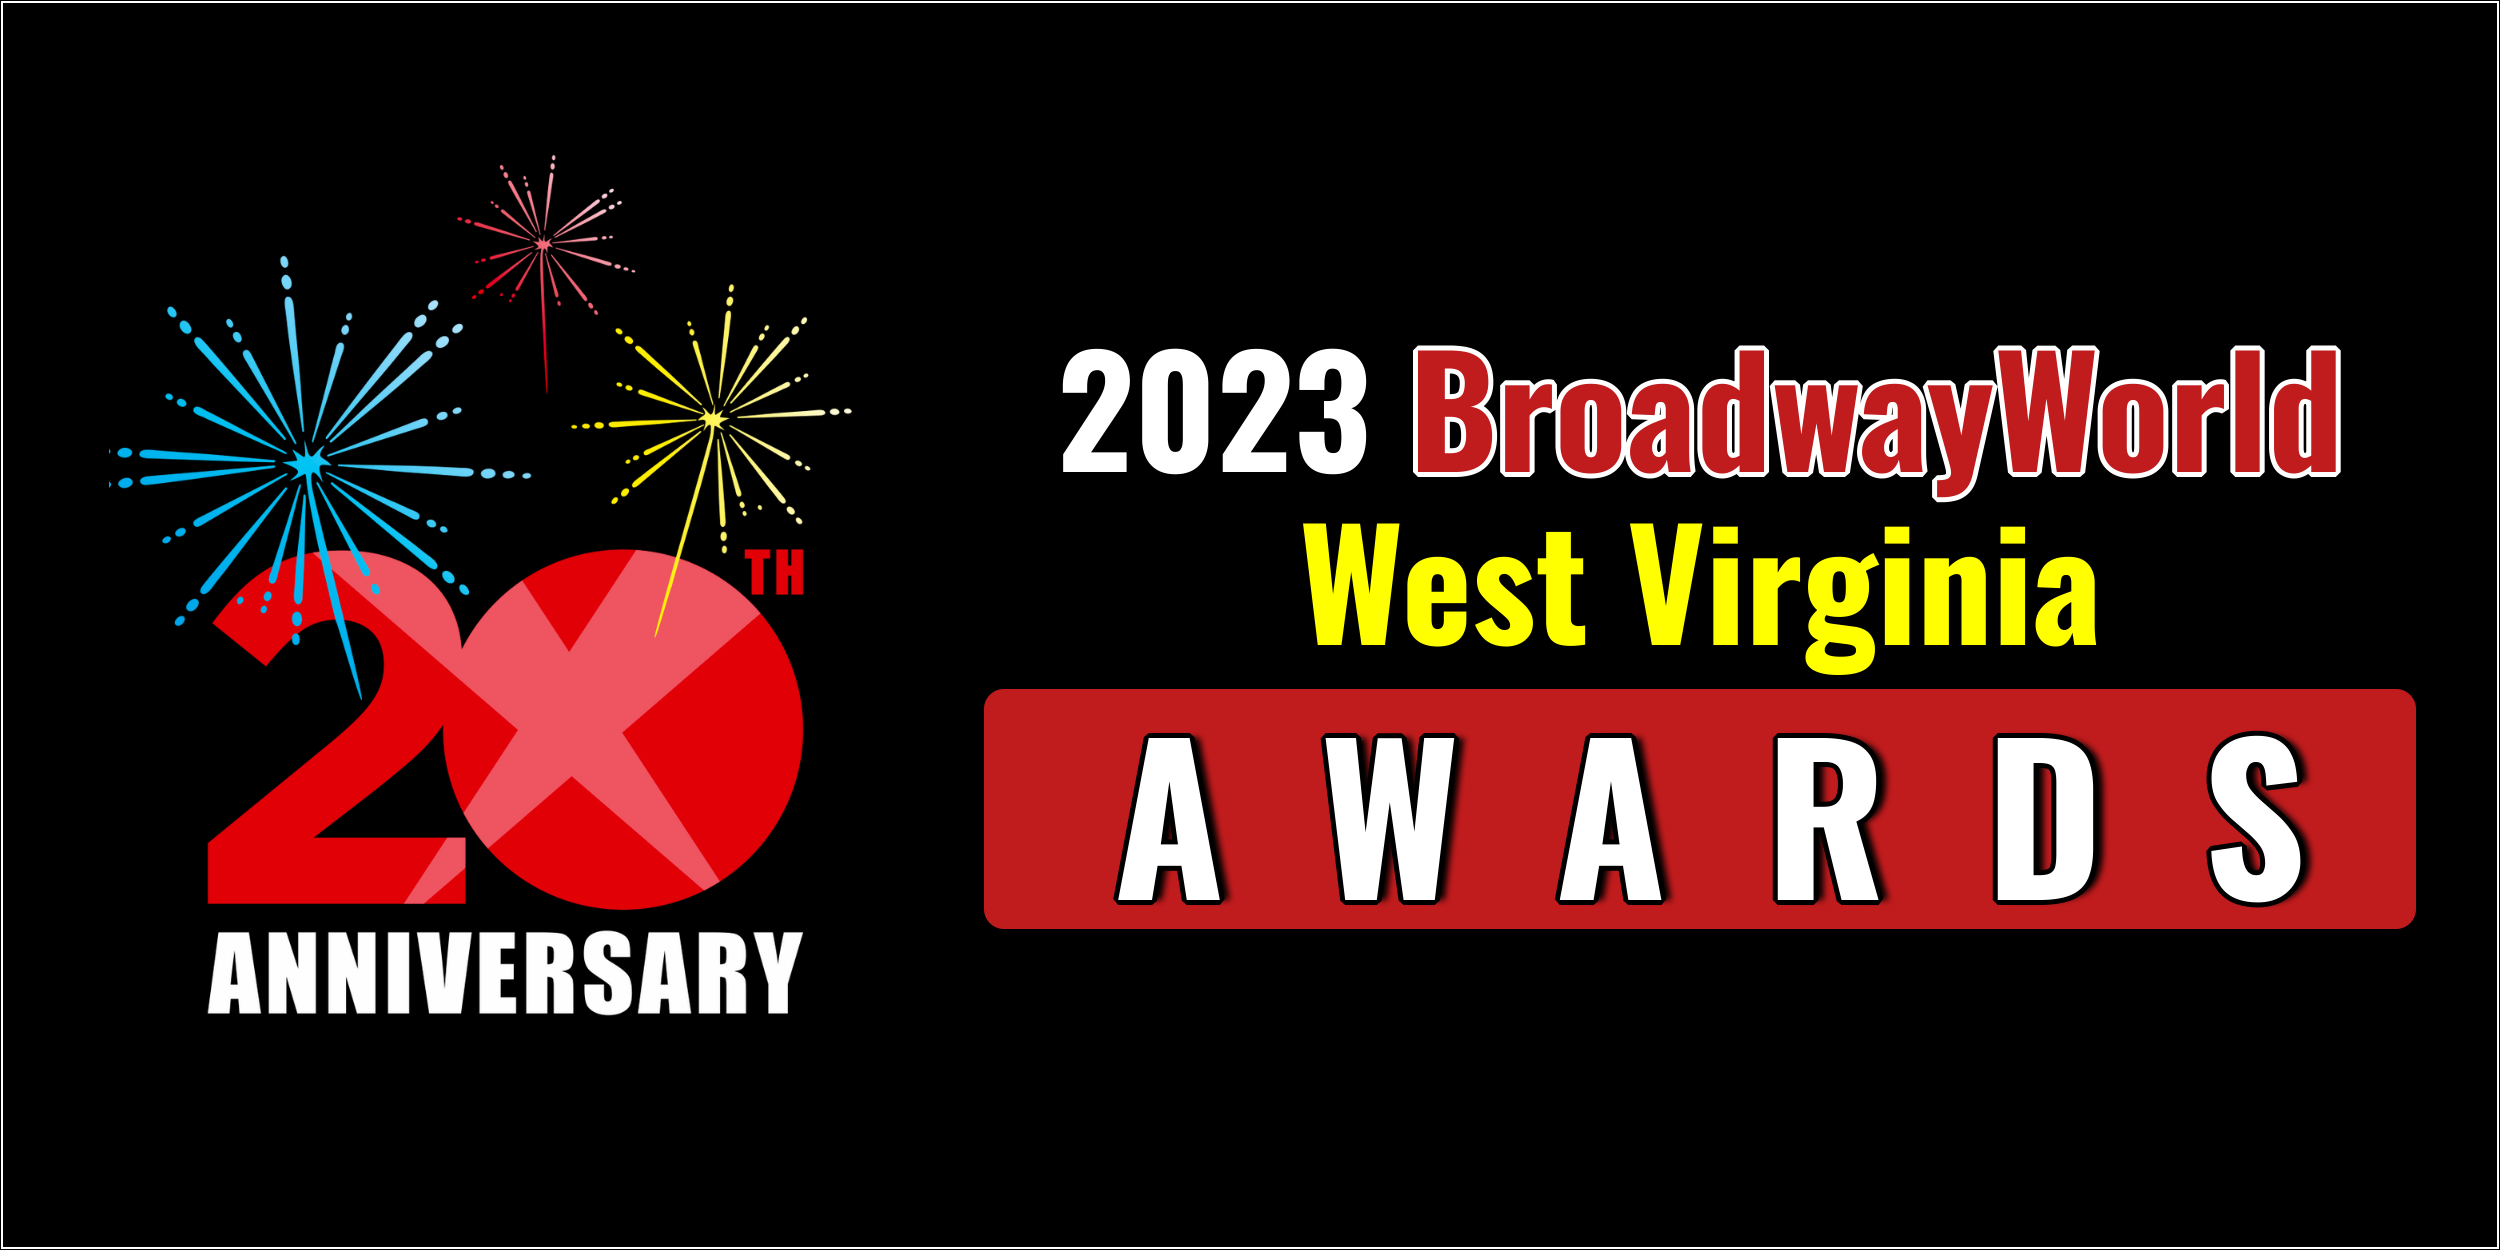 BroadwayWorld West Virginia Awards December 5th Standings; THE WIZARD OF OZ Leads Best Musical! 